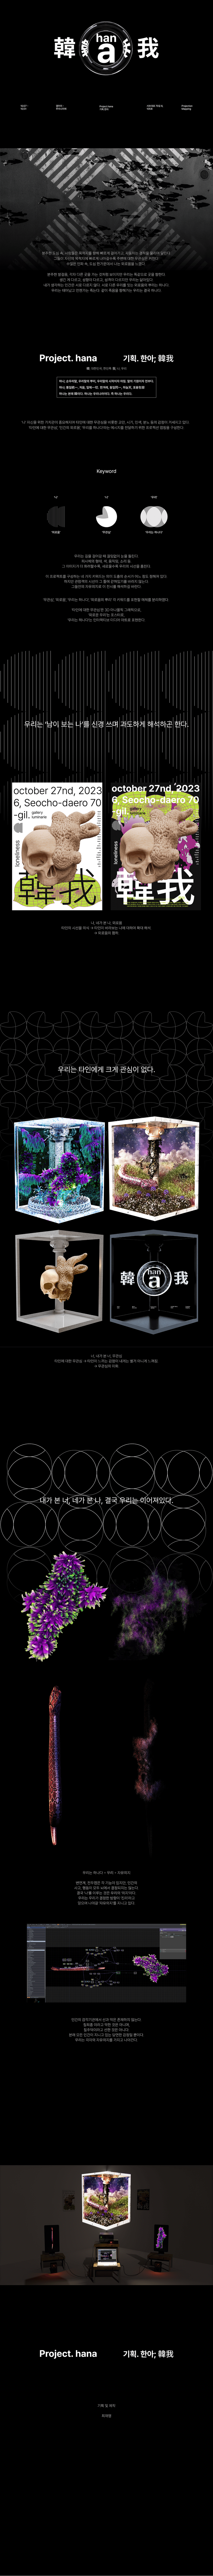 3d art anamorphic projection mapping interactive art 3d animation Poster Design cinema 4d redshift Render